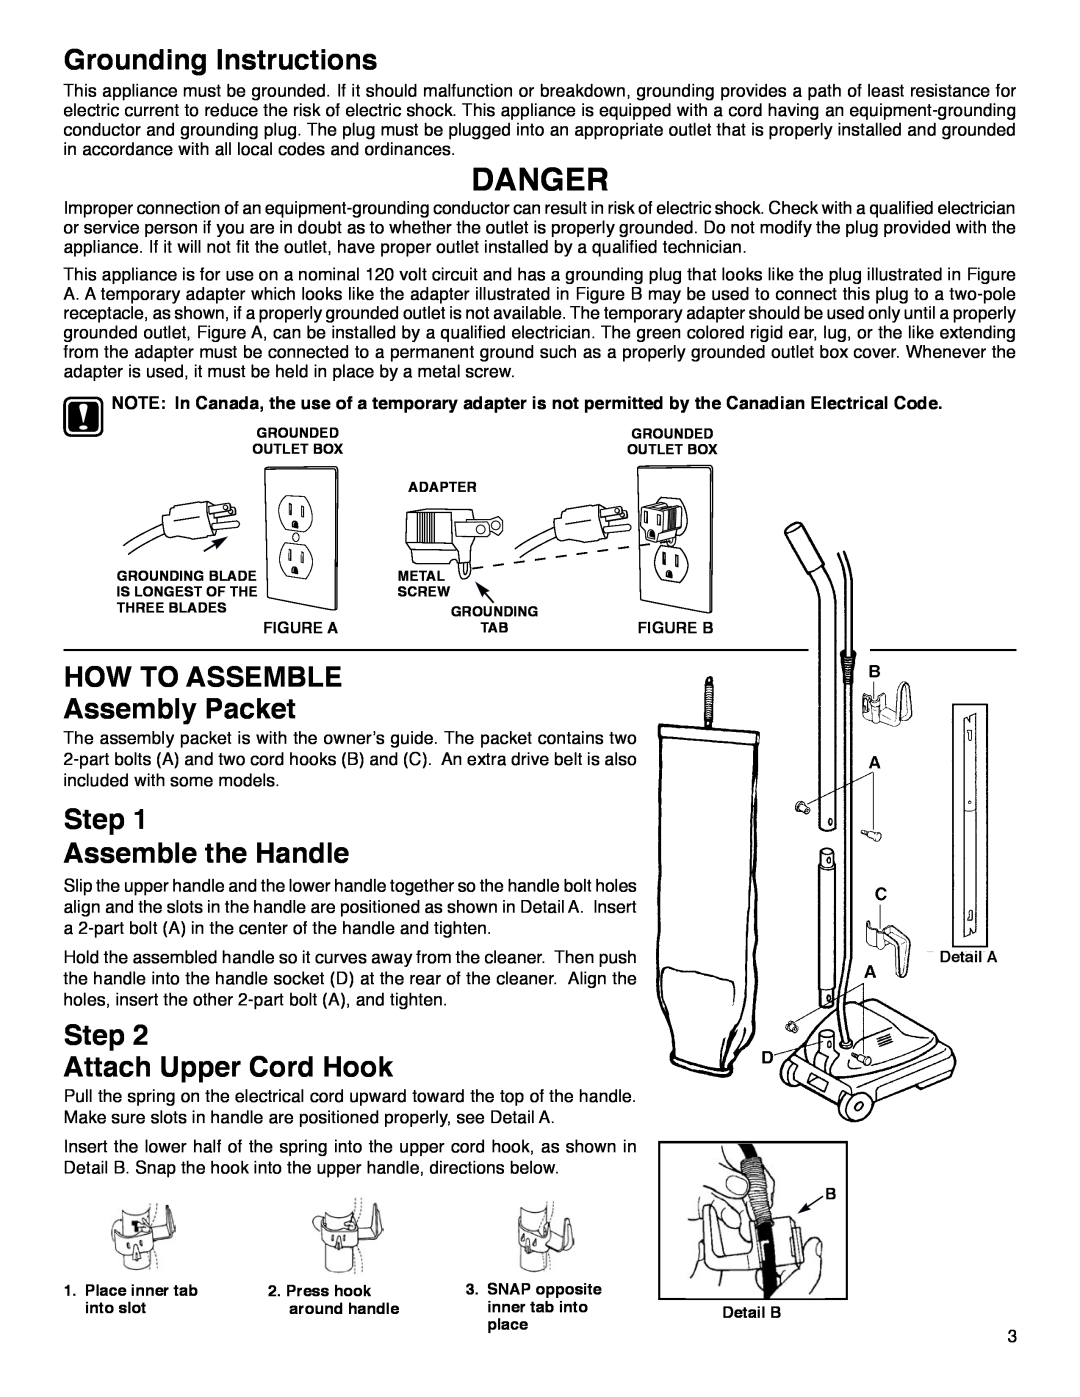 Sanitaire 600, 800 warranty Danger, Grounding Instructions, HOW TO ASSEMBLE Assembly Packet, Step Assemble the Handle 